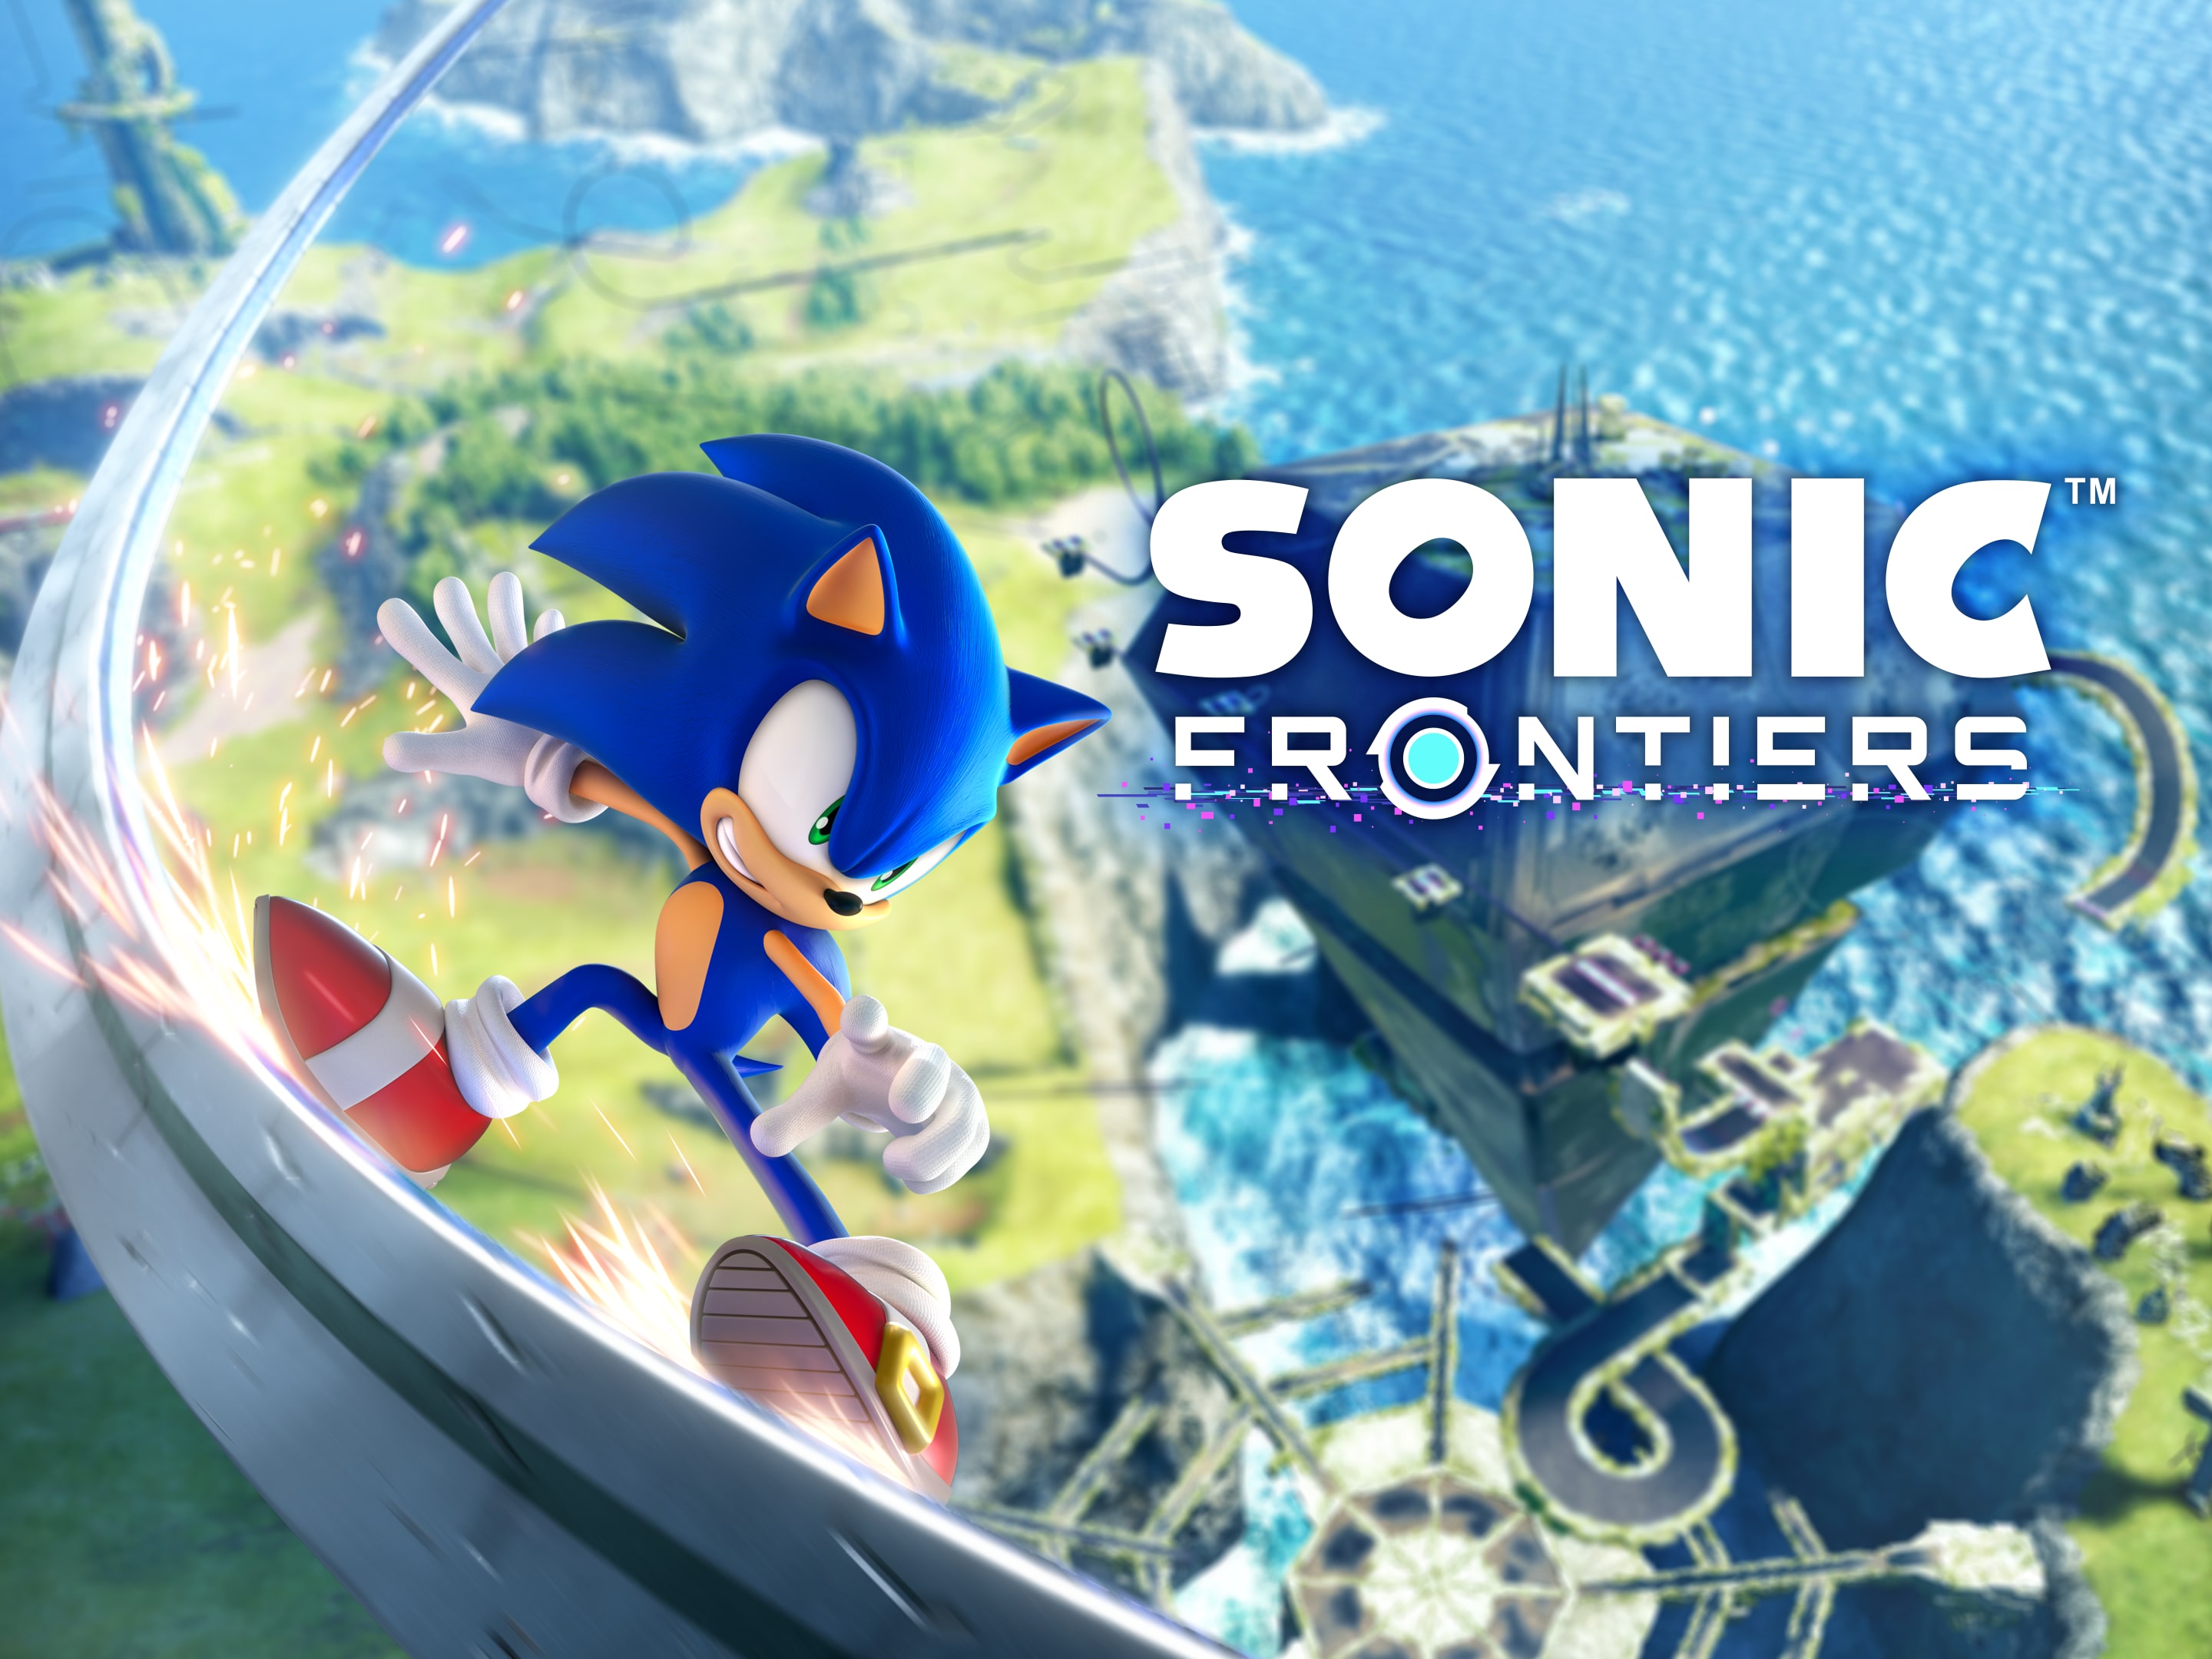 Sonic Frontiers - PS4 & PS5 Games